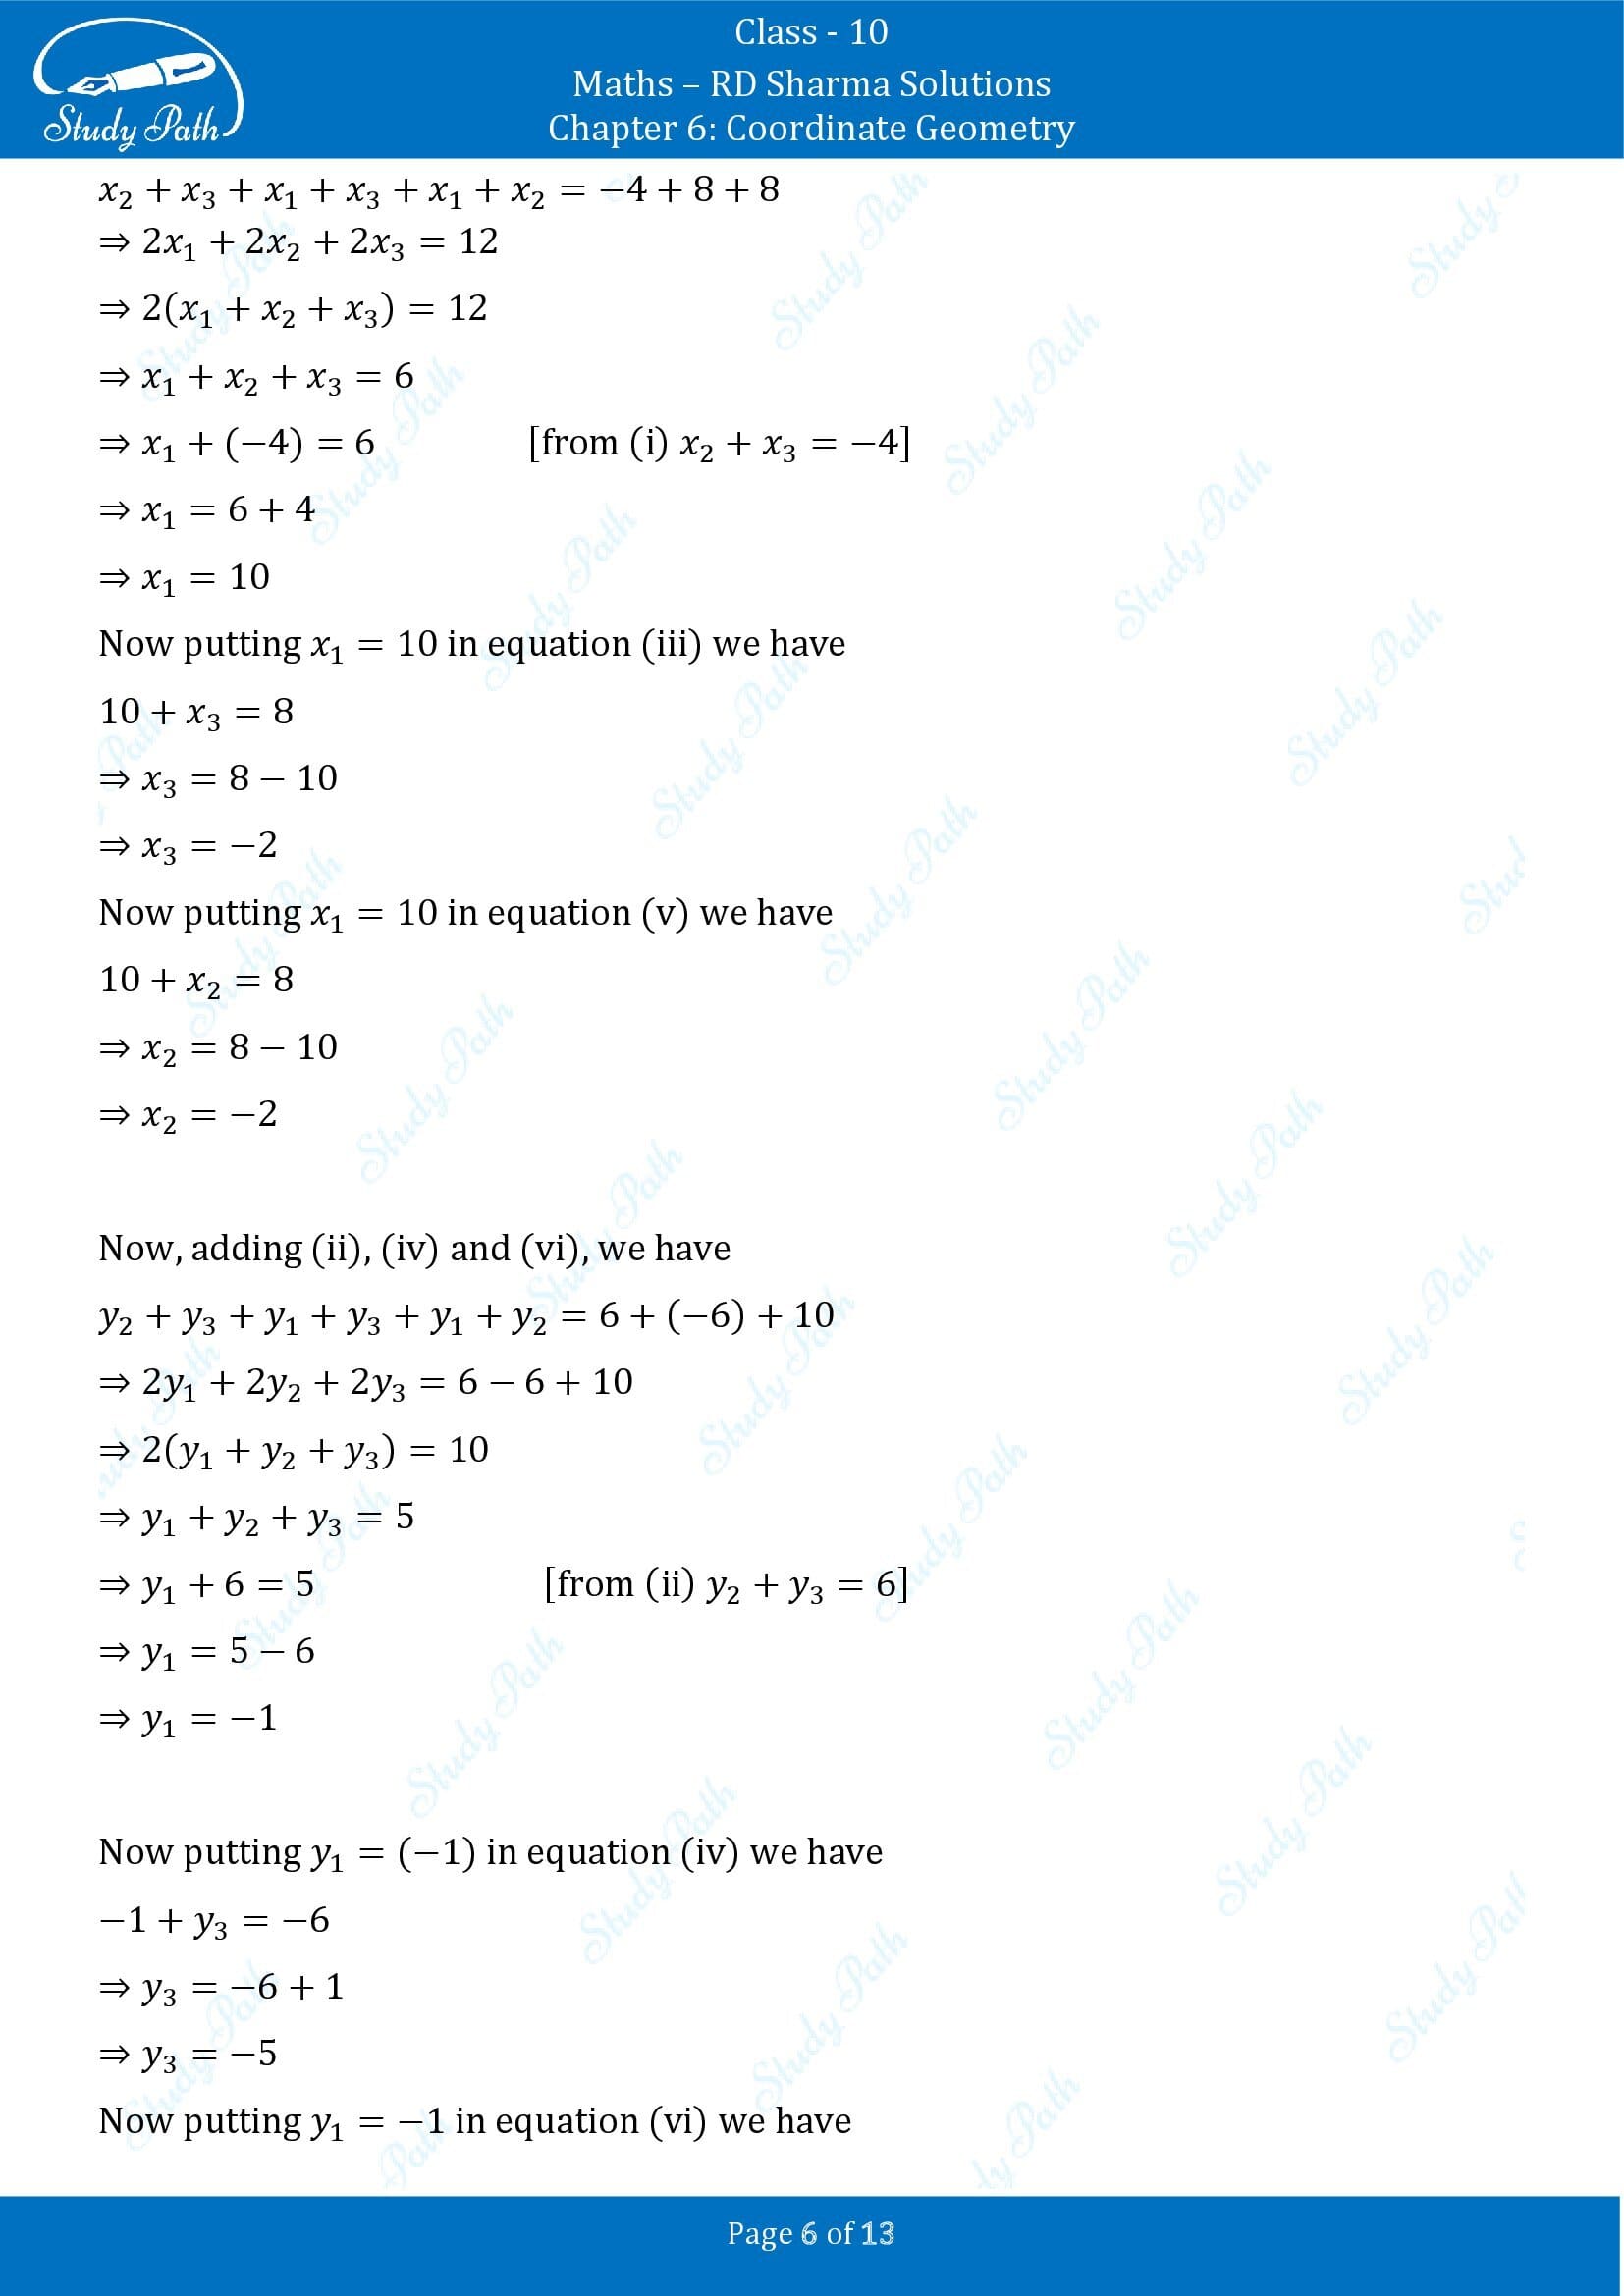 RD Sharma Solutions Class 10 Chapter 6 Coordinate Geometry Exercise 6.4 00006